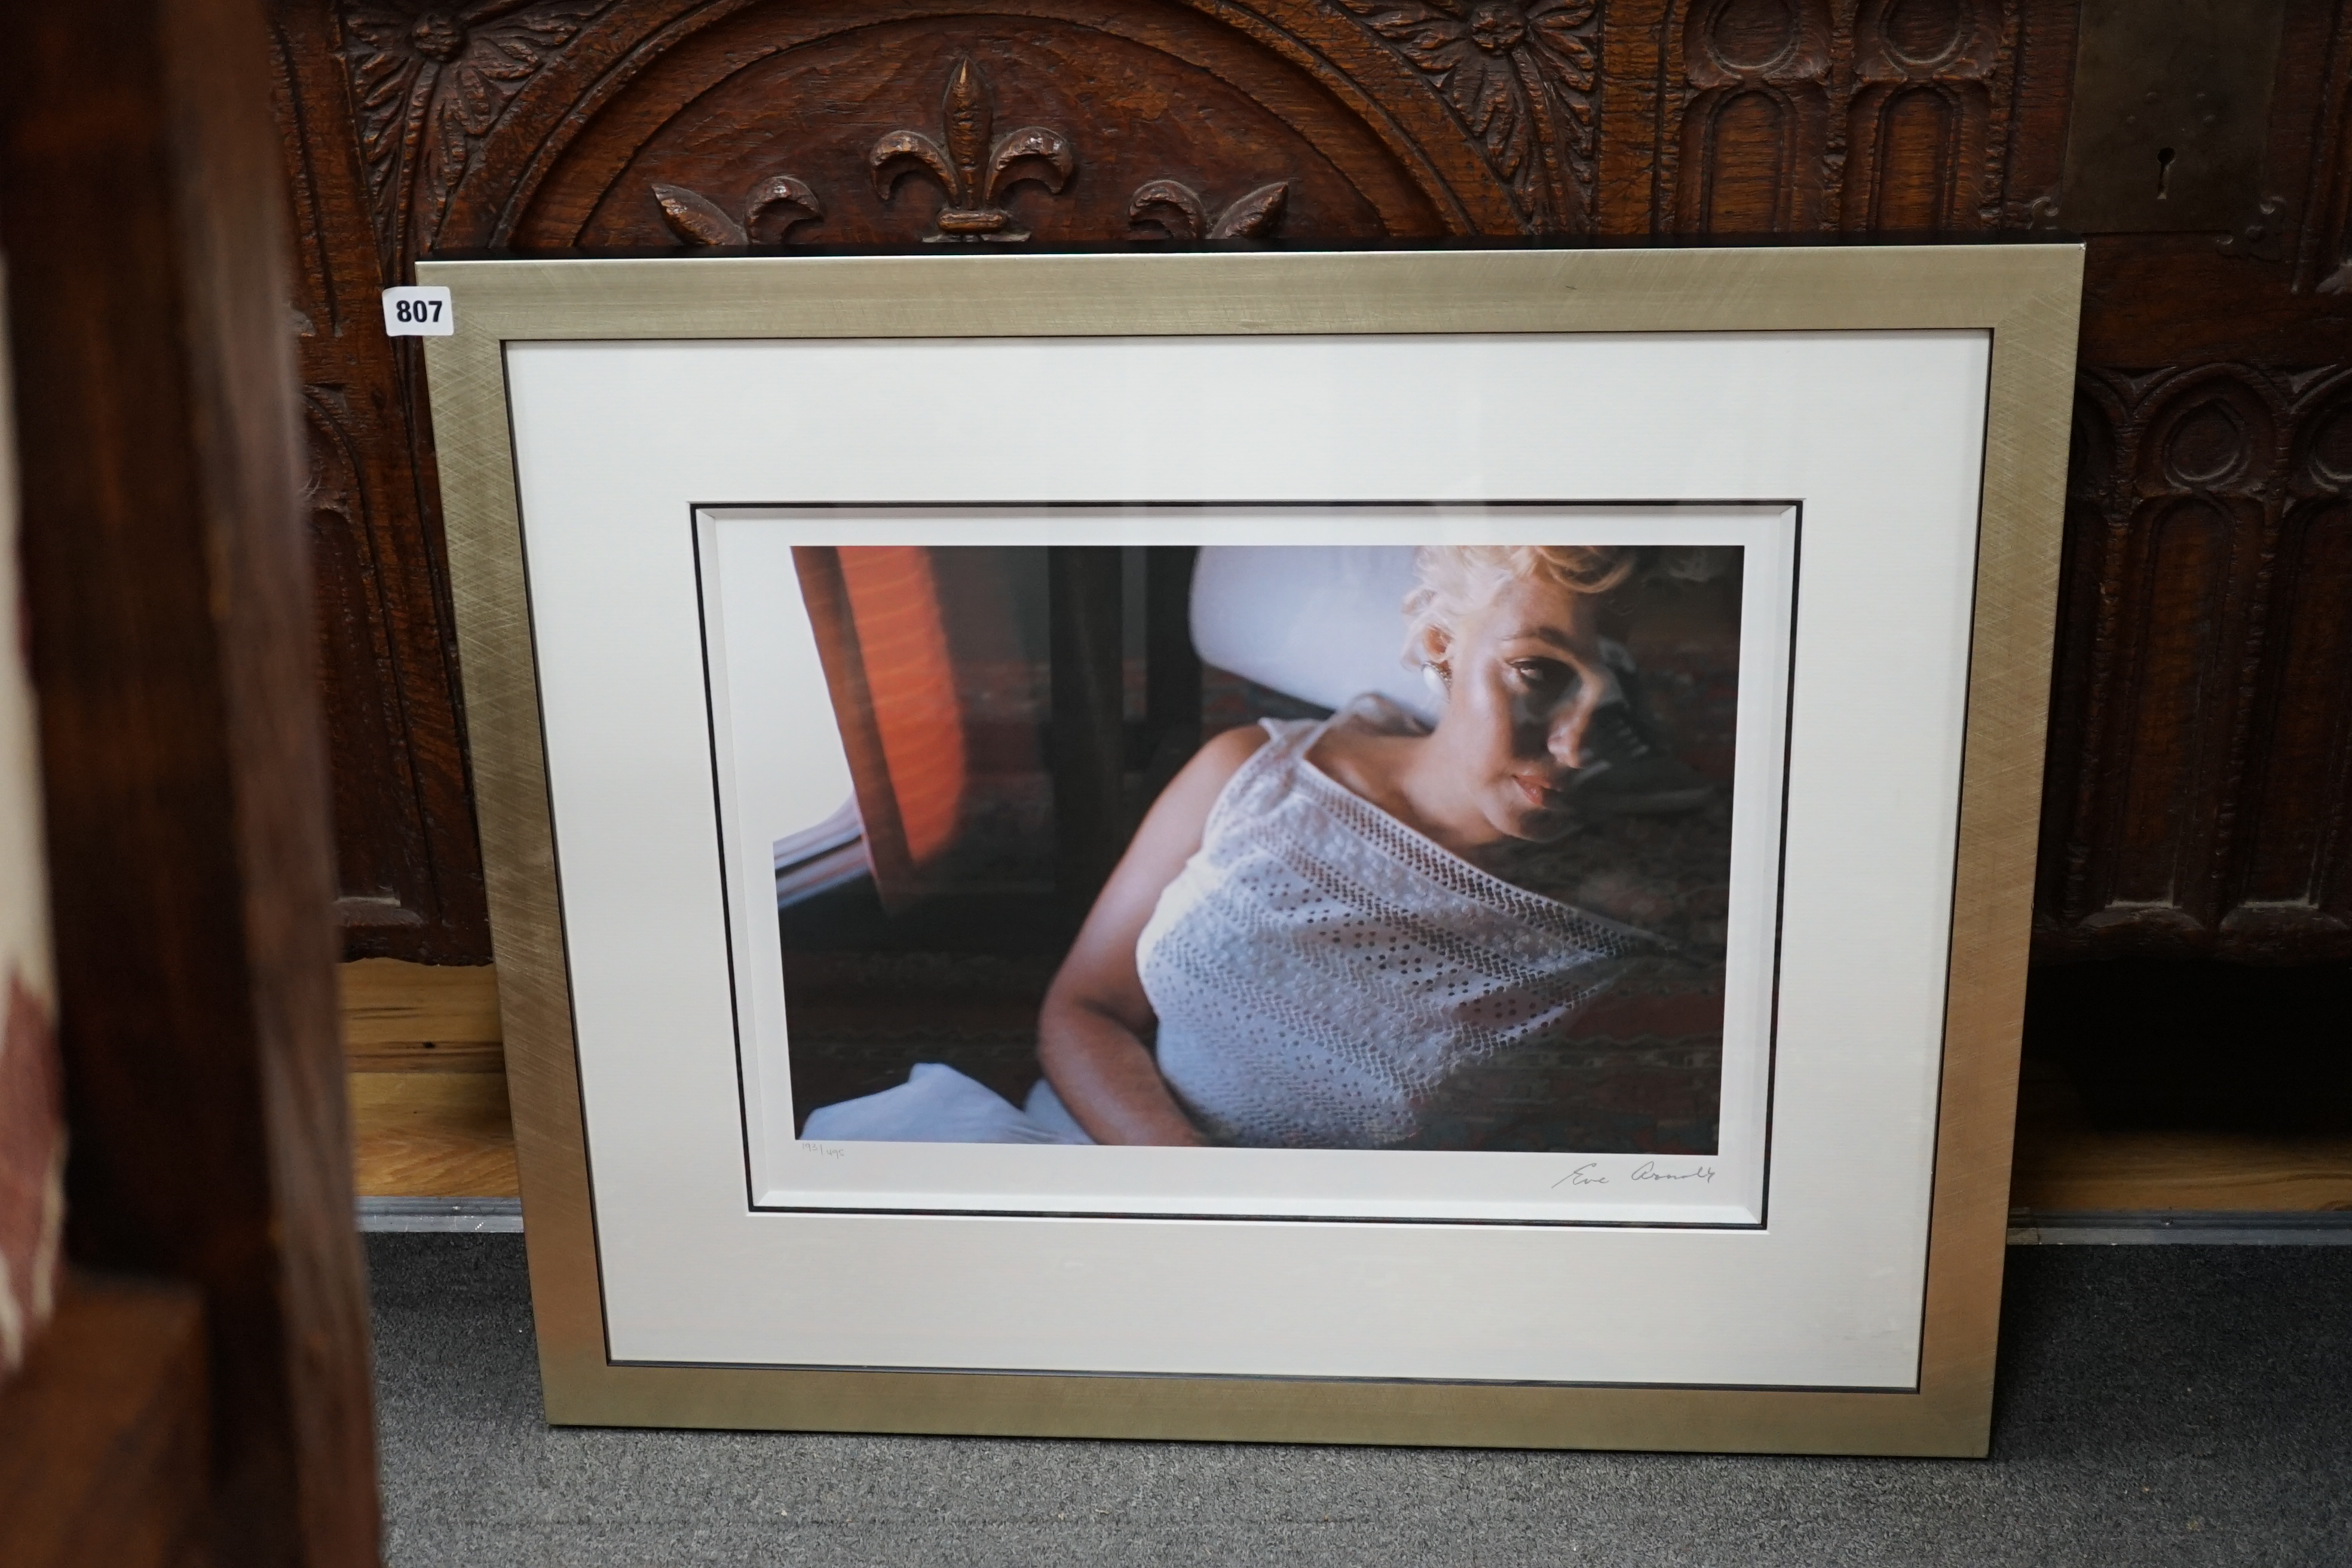 After Eve Arnold (1912-2012), limited edition re-printed colour photograph, Marilyn Monroe, pencil numbered 193/495, 49cm x 35cm. Condition - good